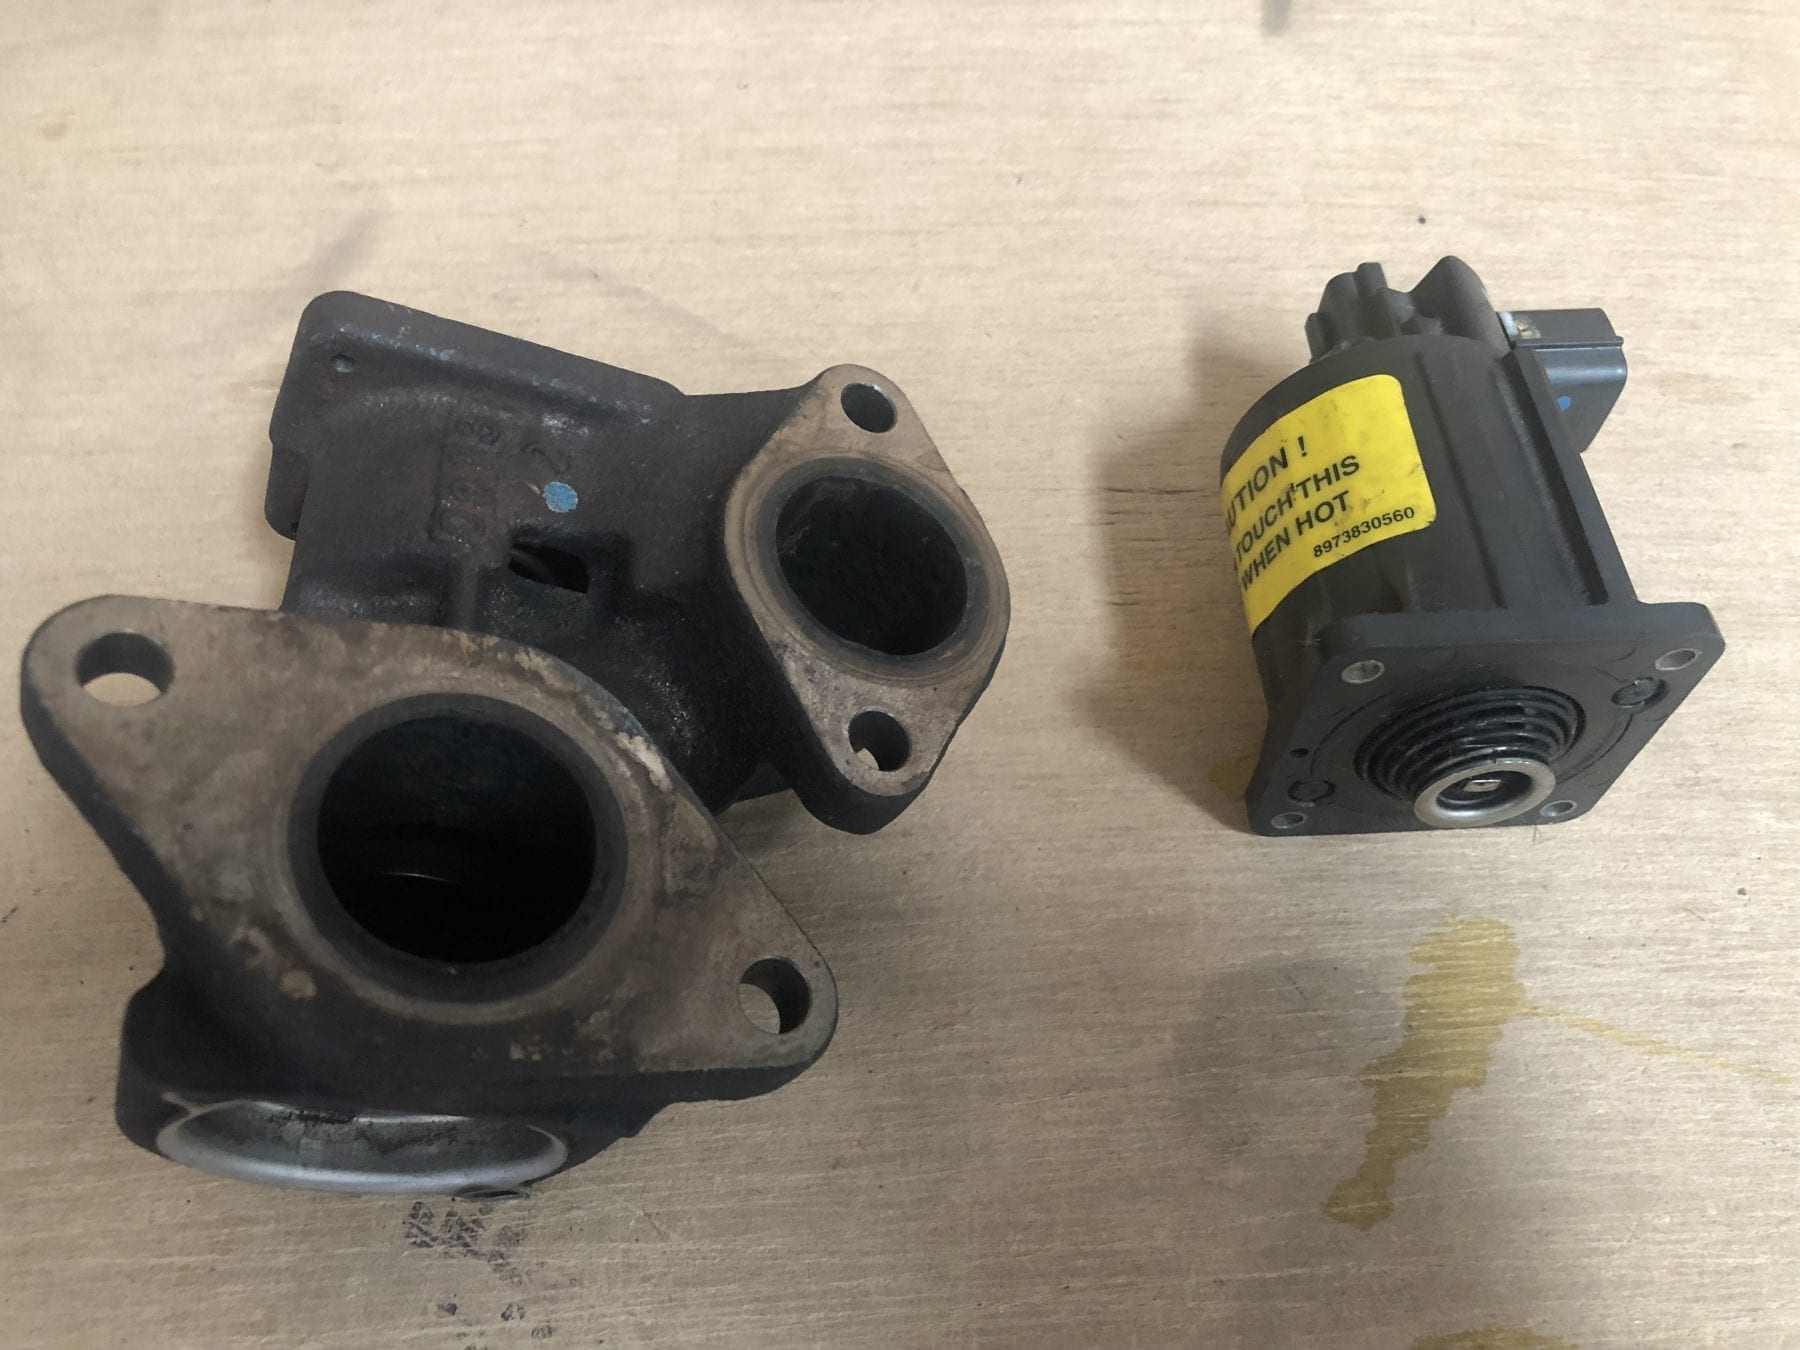 Faulty EGR valve removed due to carbon buildup